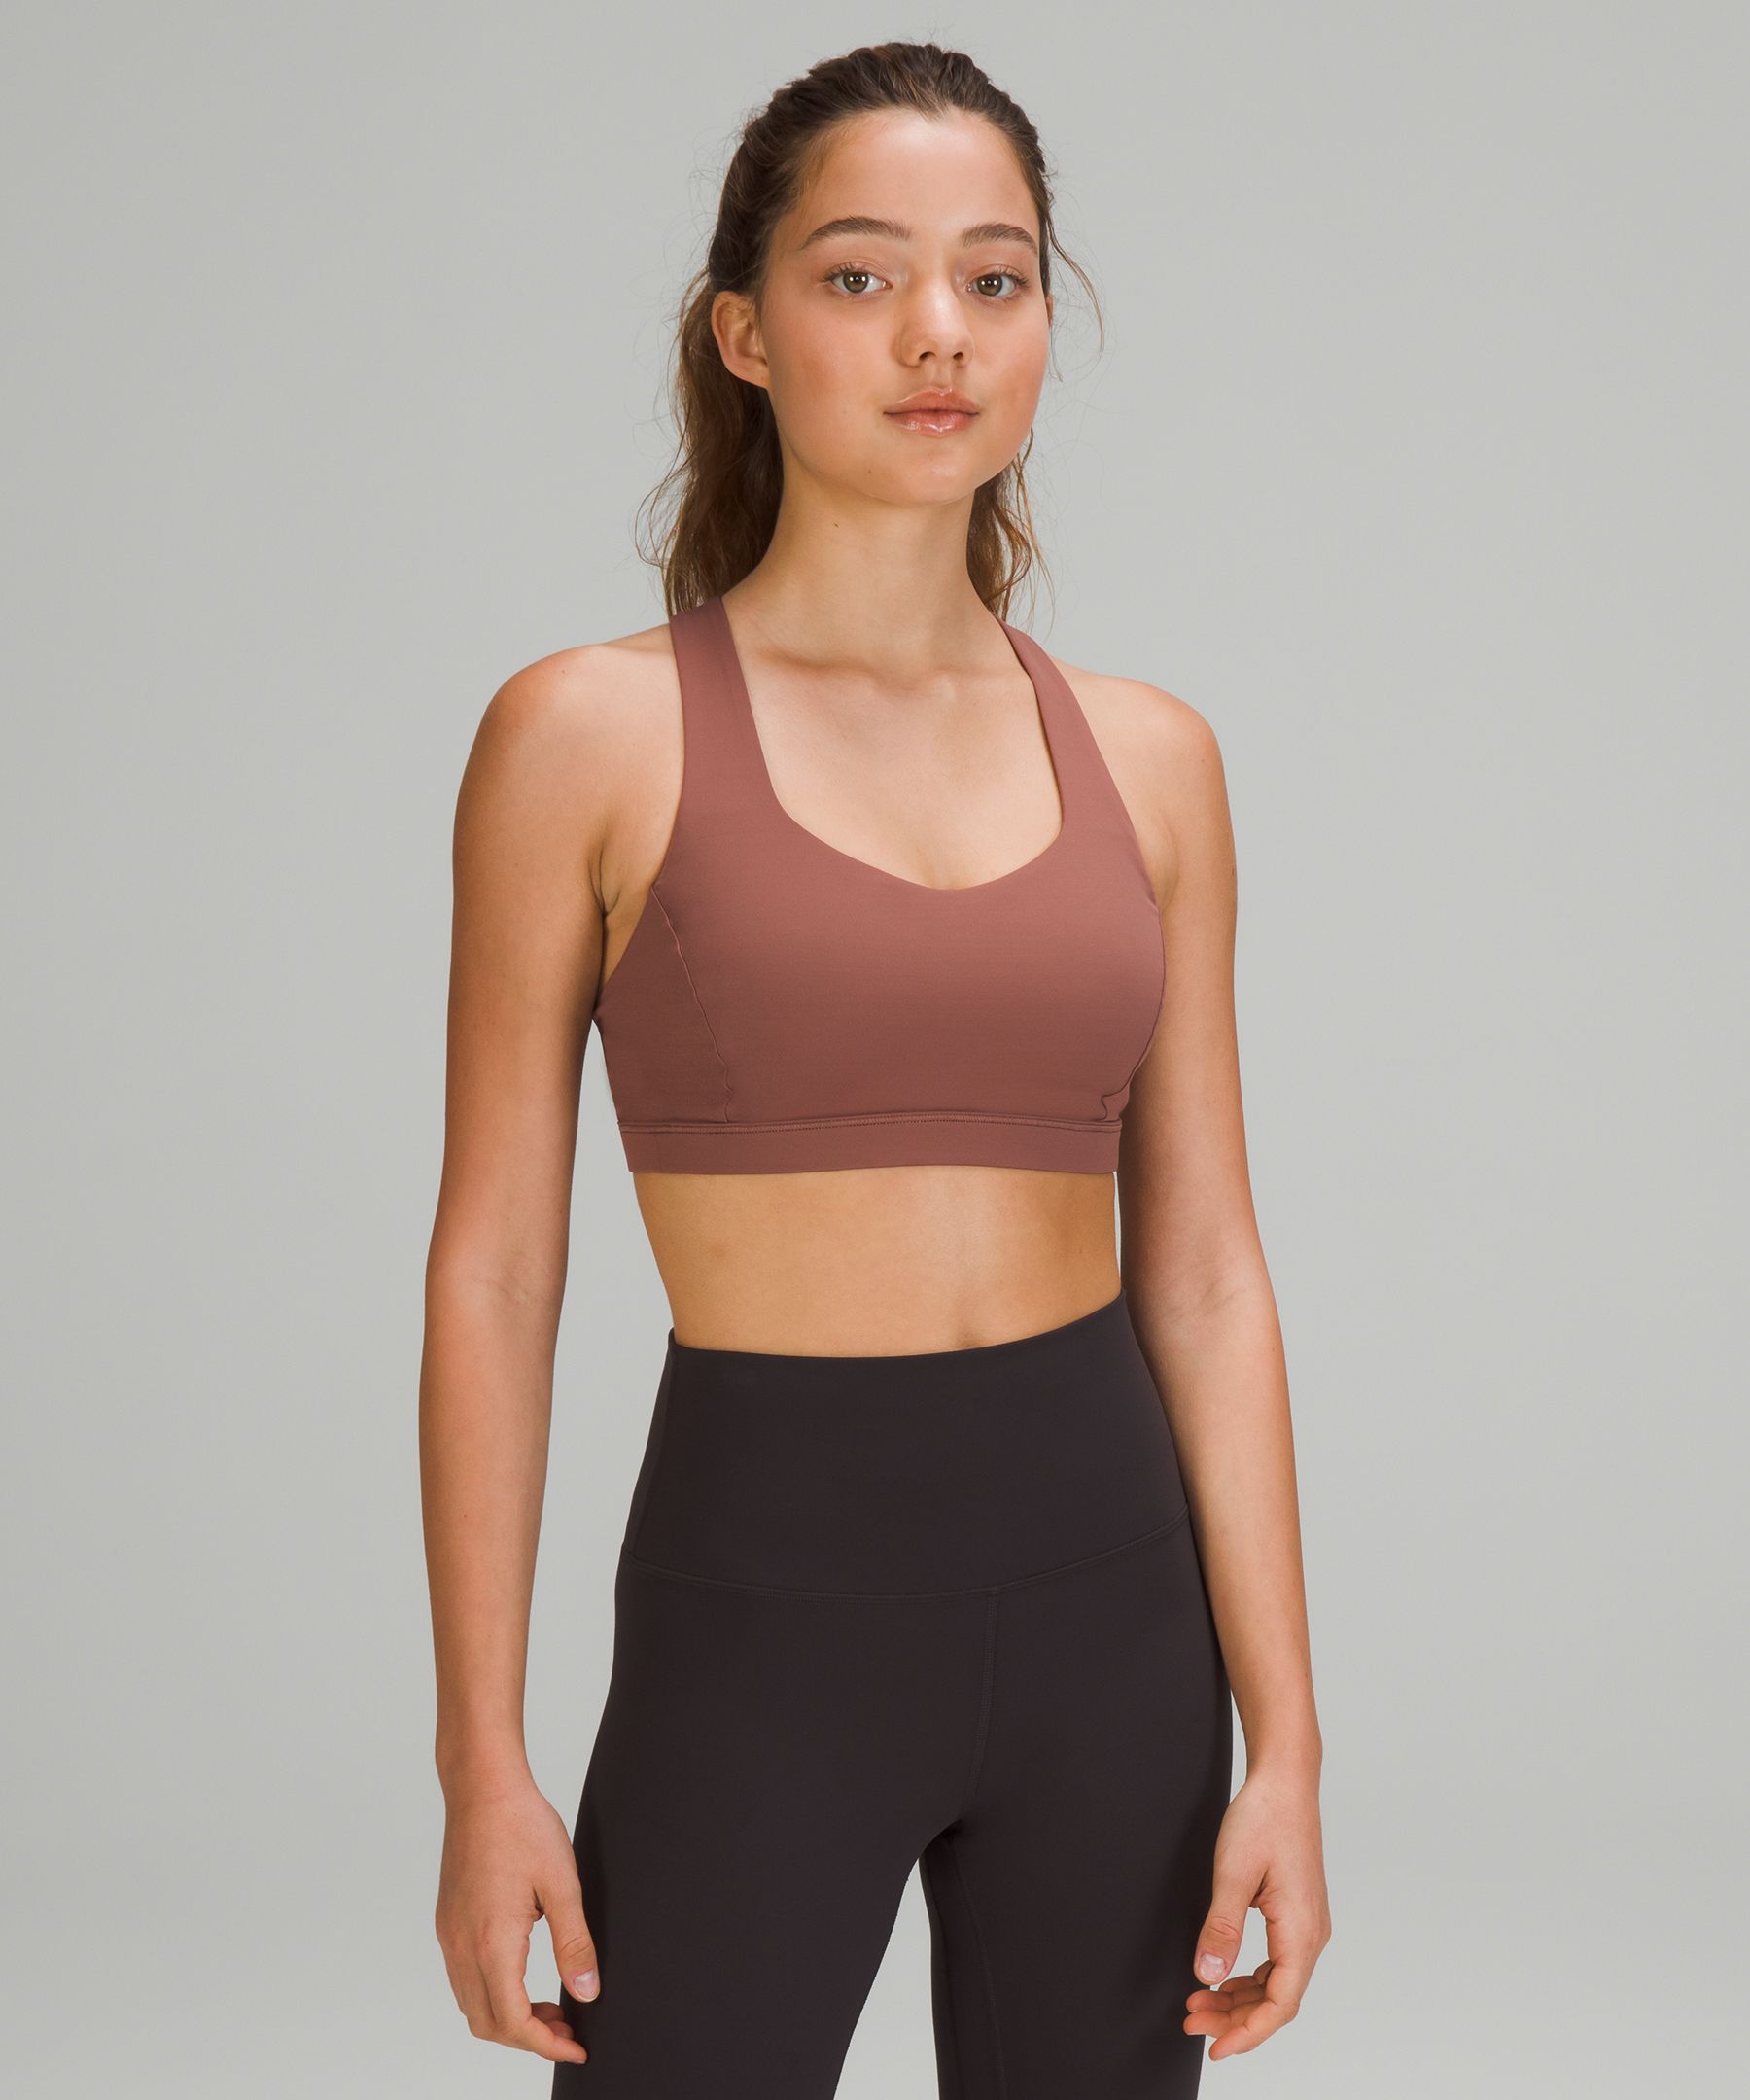 Lululemon Free To Be Serene Bra Light Support, C/d Cup In Smoky Topaz